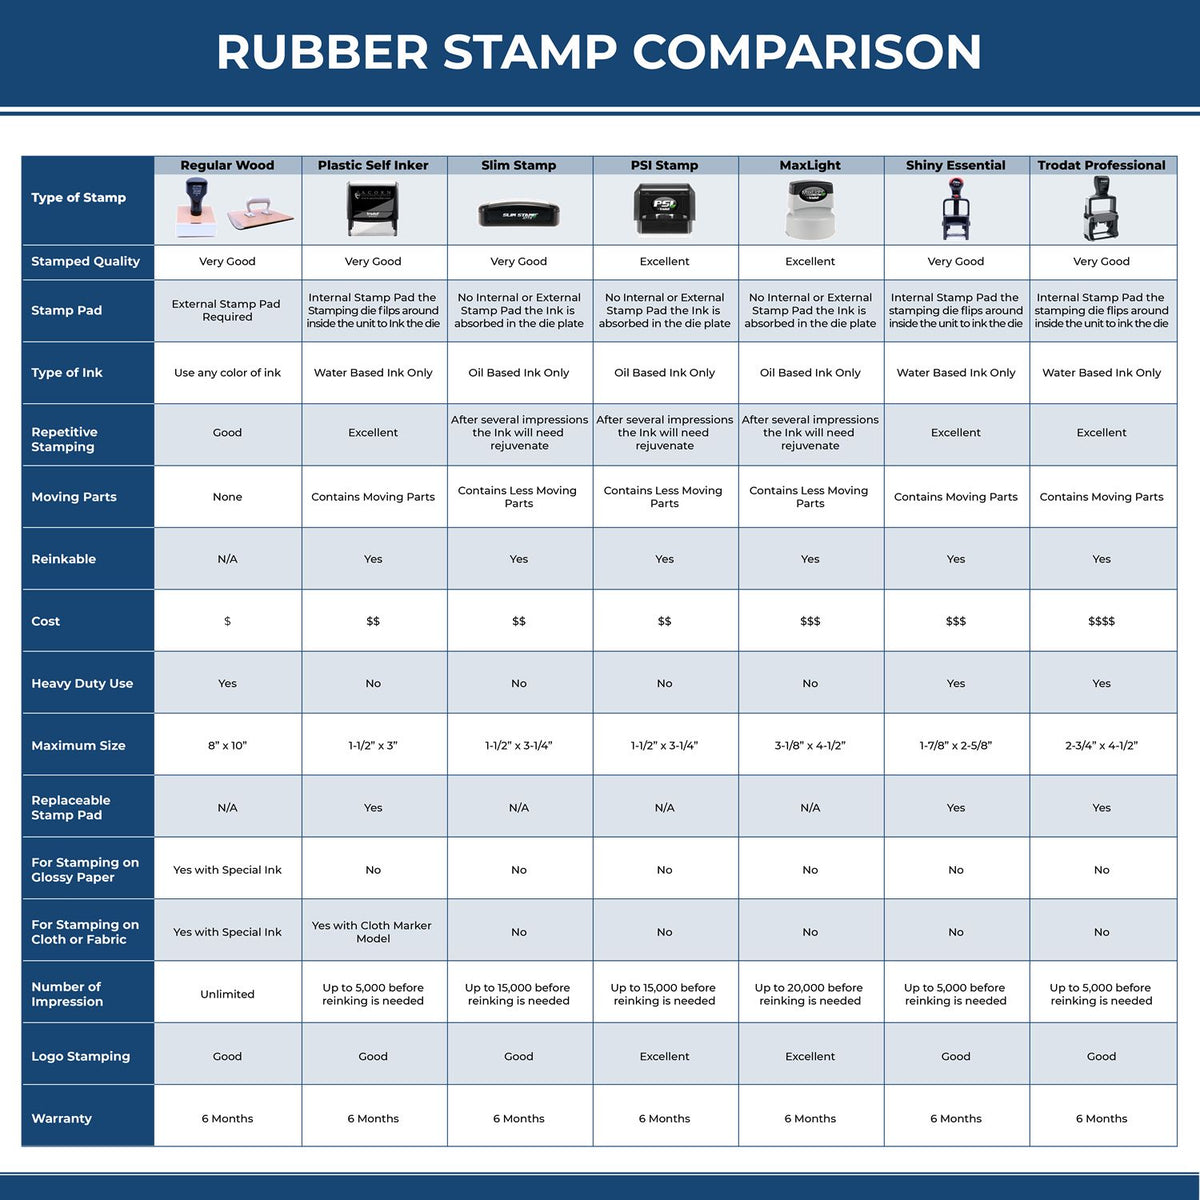 Professional Engineer Self Inking Rubber Stamp of Seal 3006ENG Rubber Stamp Comparison